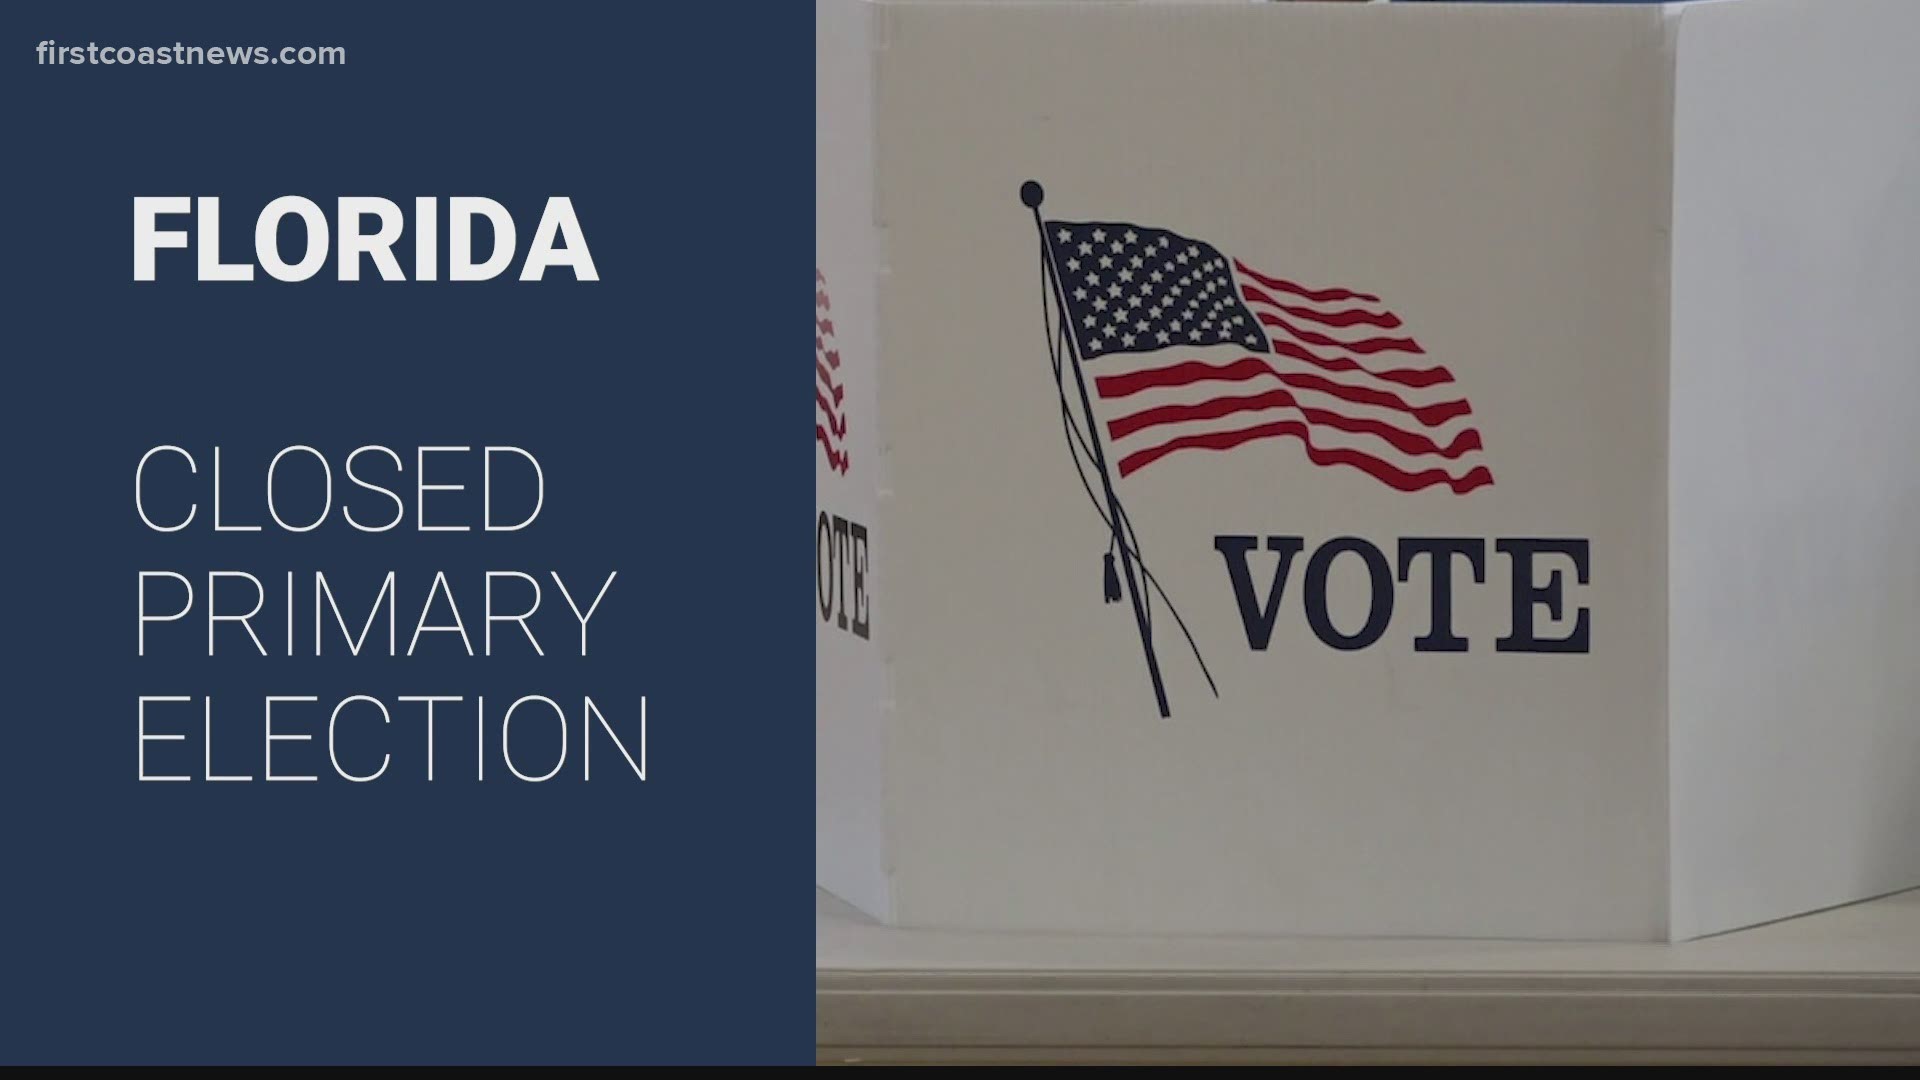 Voters who are not registered with a political party are still able to vote in the Florida primary, but their ballots will only include non-partisan races.